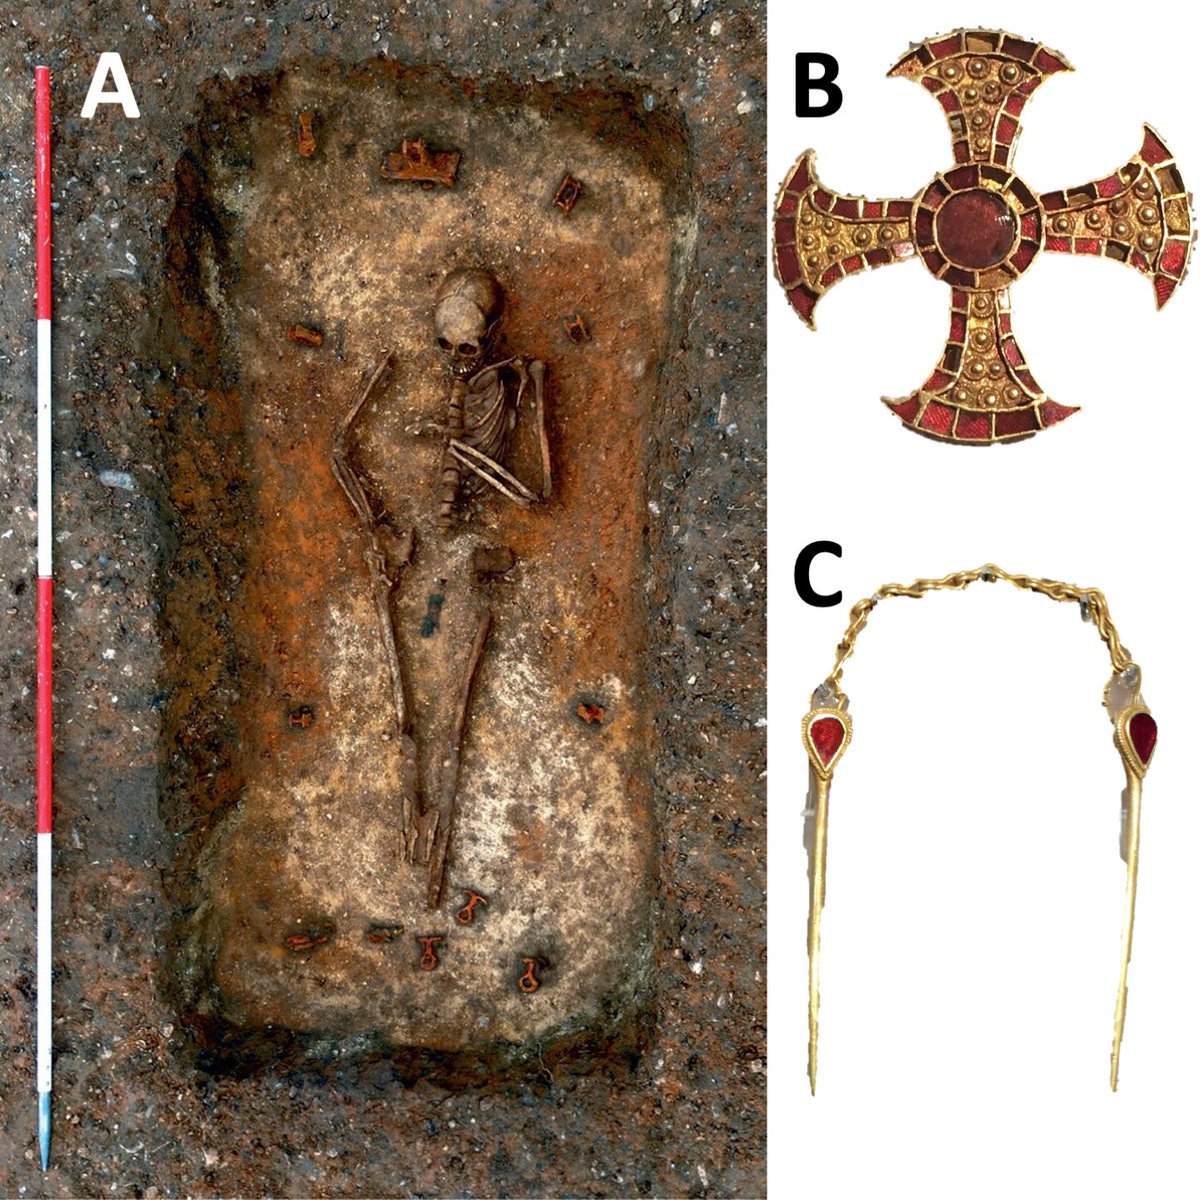 📣 New article alert! doi.org/10.15184/aqy.2… V. proud of this! 'Women of the Conversion Period' - what's going on w female mobility in 7thC AD? @AntiquityJ Incl. #isotopes #GIS #rstats & #bedburials Stay tuned for more from this project w H. Hamerow 👀#earlymedieval🧵👇